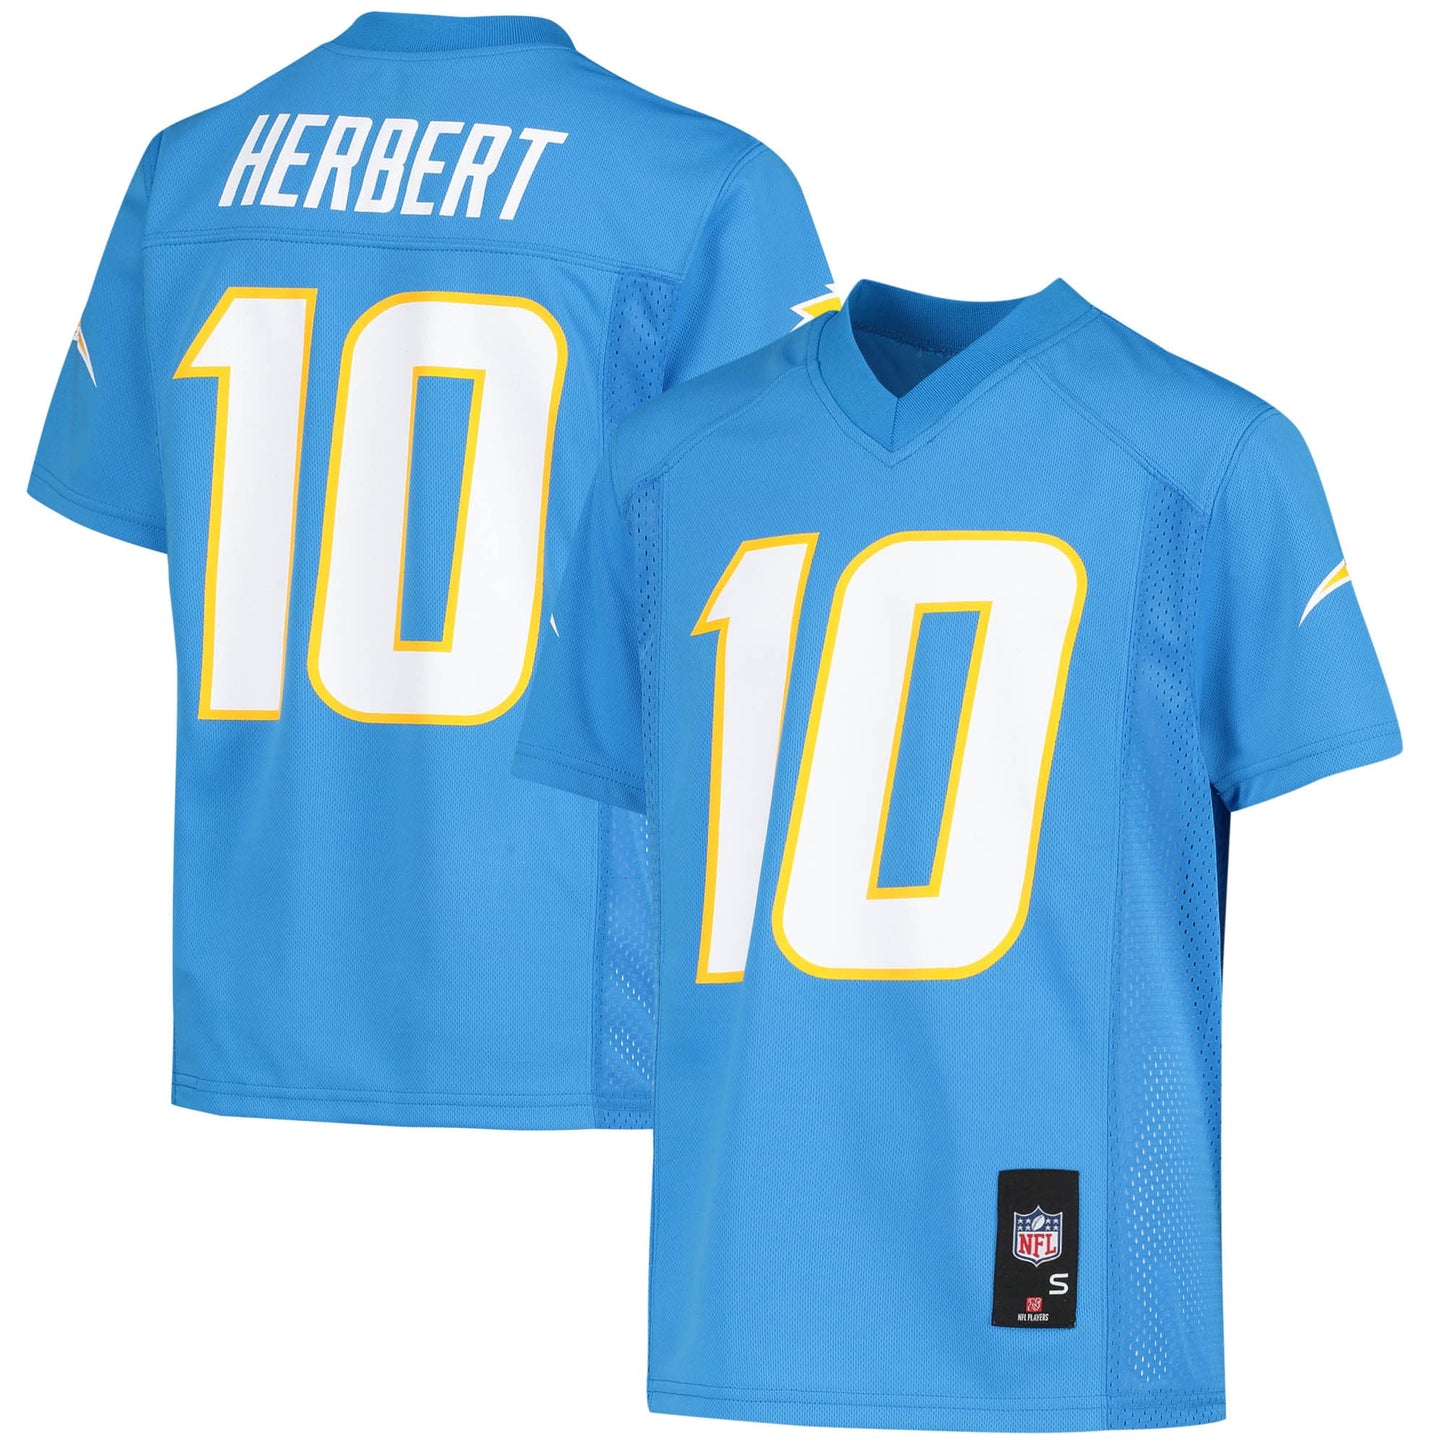 Justin Herbert Los Angeles Chargers Youth Replica Player Jersey - Powder Blue